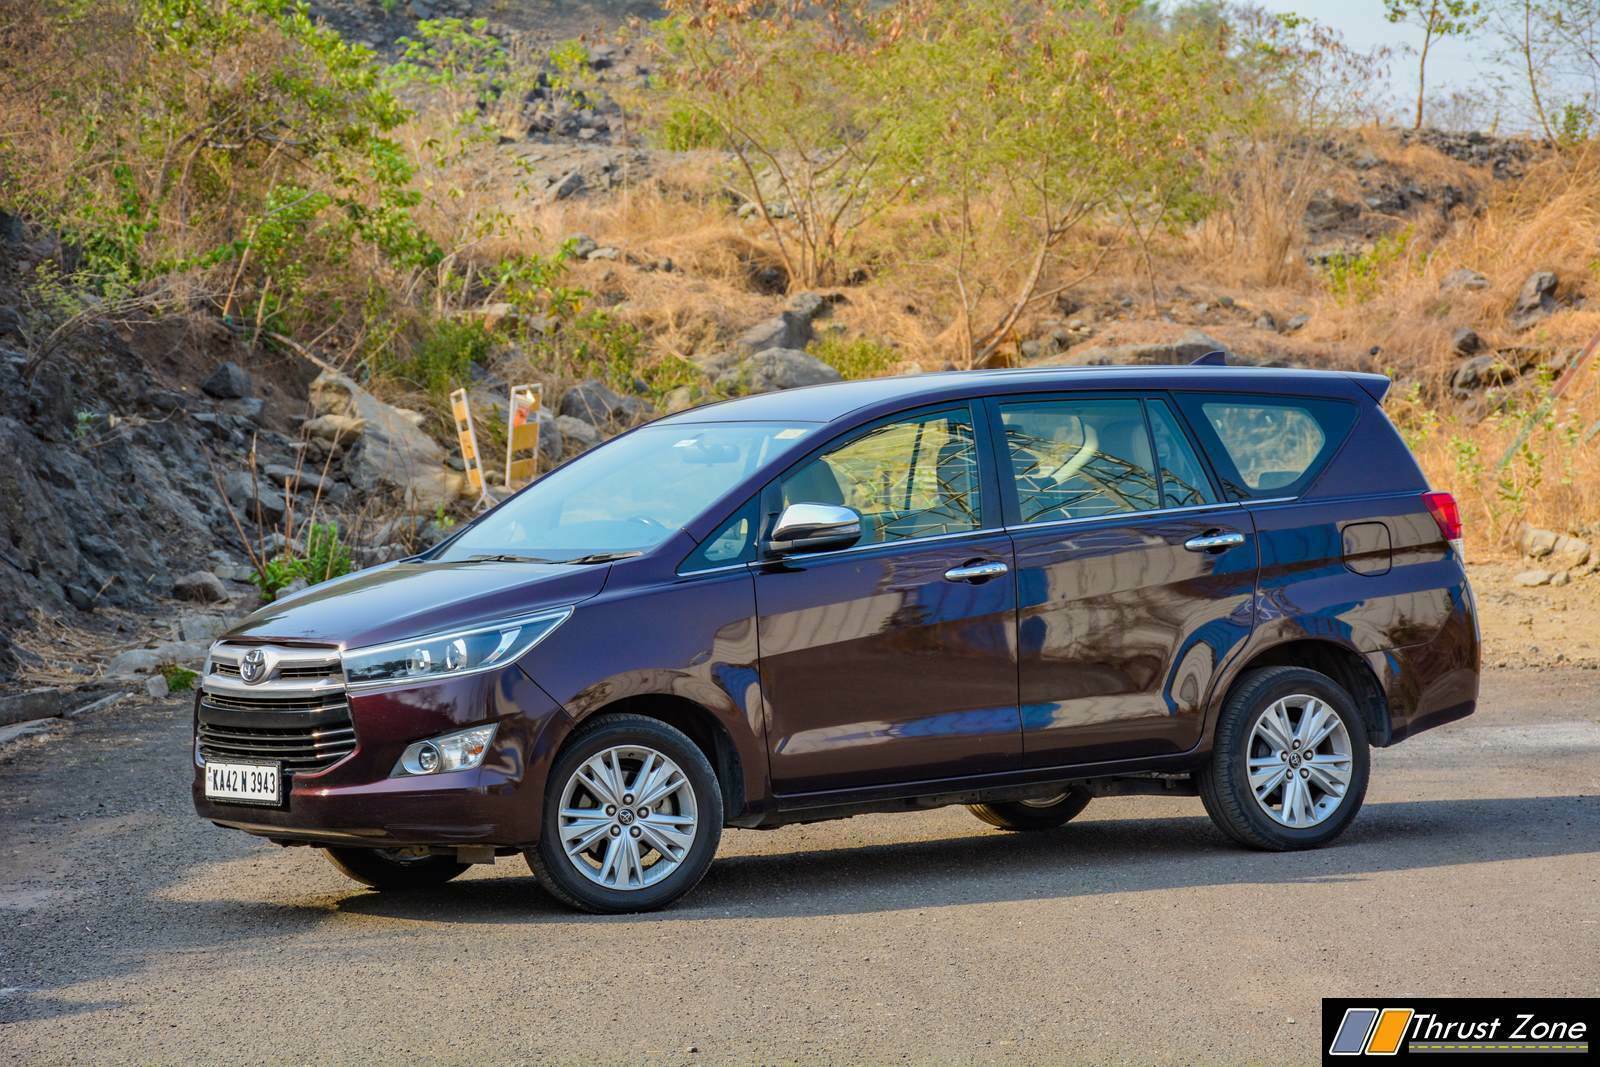 GS Design launched with customised Toyota Innova Crysta and Force Traveller